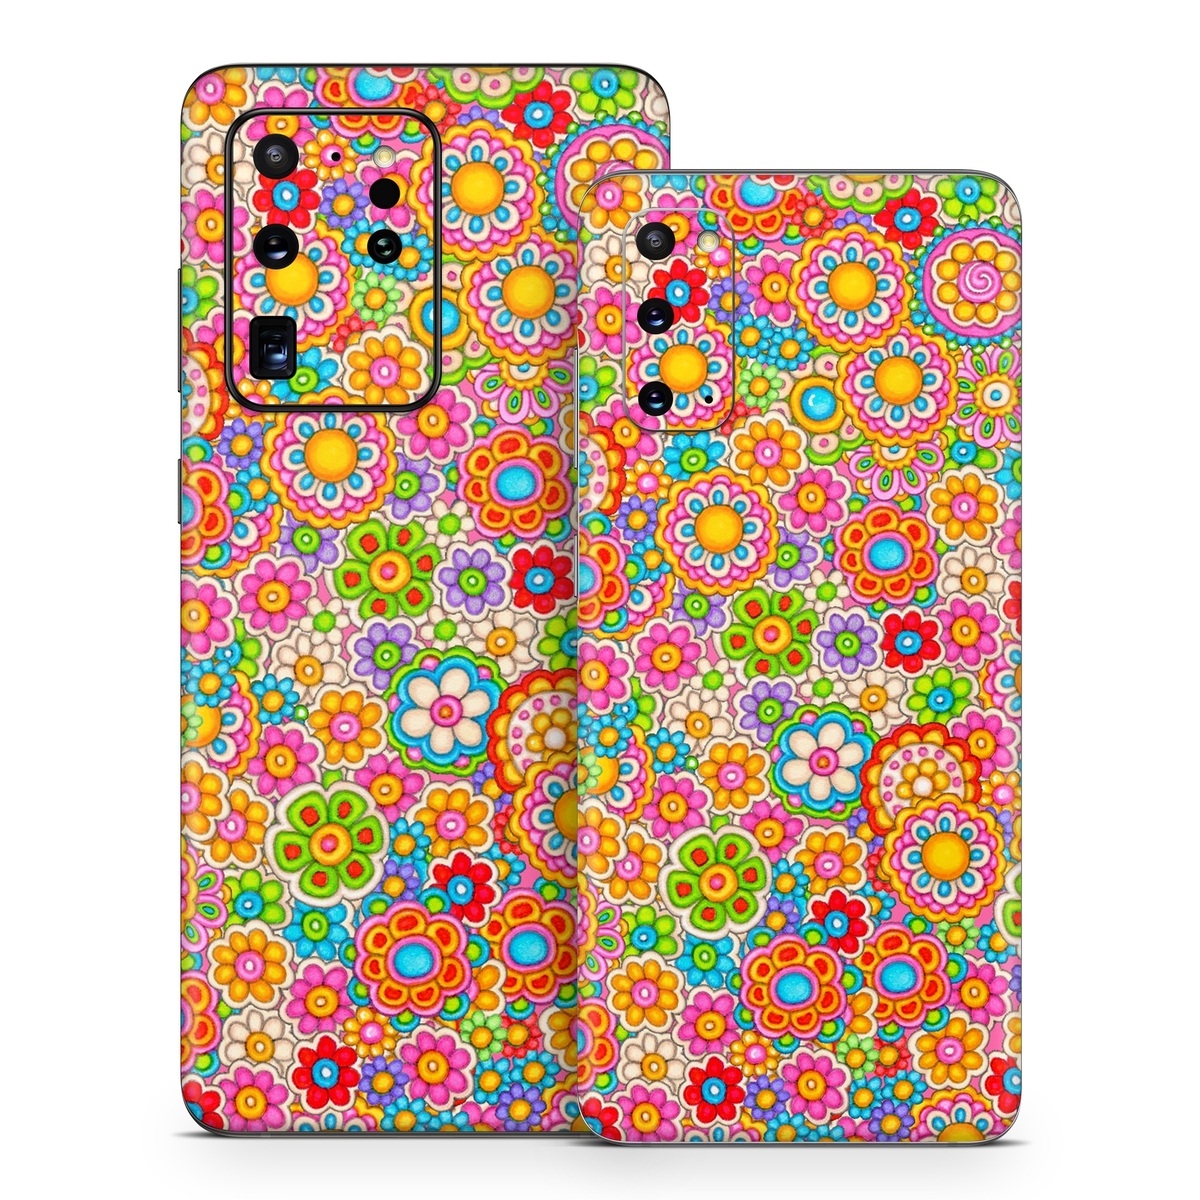 Samsung Galaxy S20 Series Skin design of Pattern, Design, Textile, Visual arts, with pink, red, orange, yellow, green, blue, purple colors